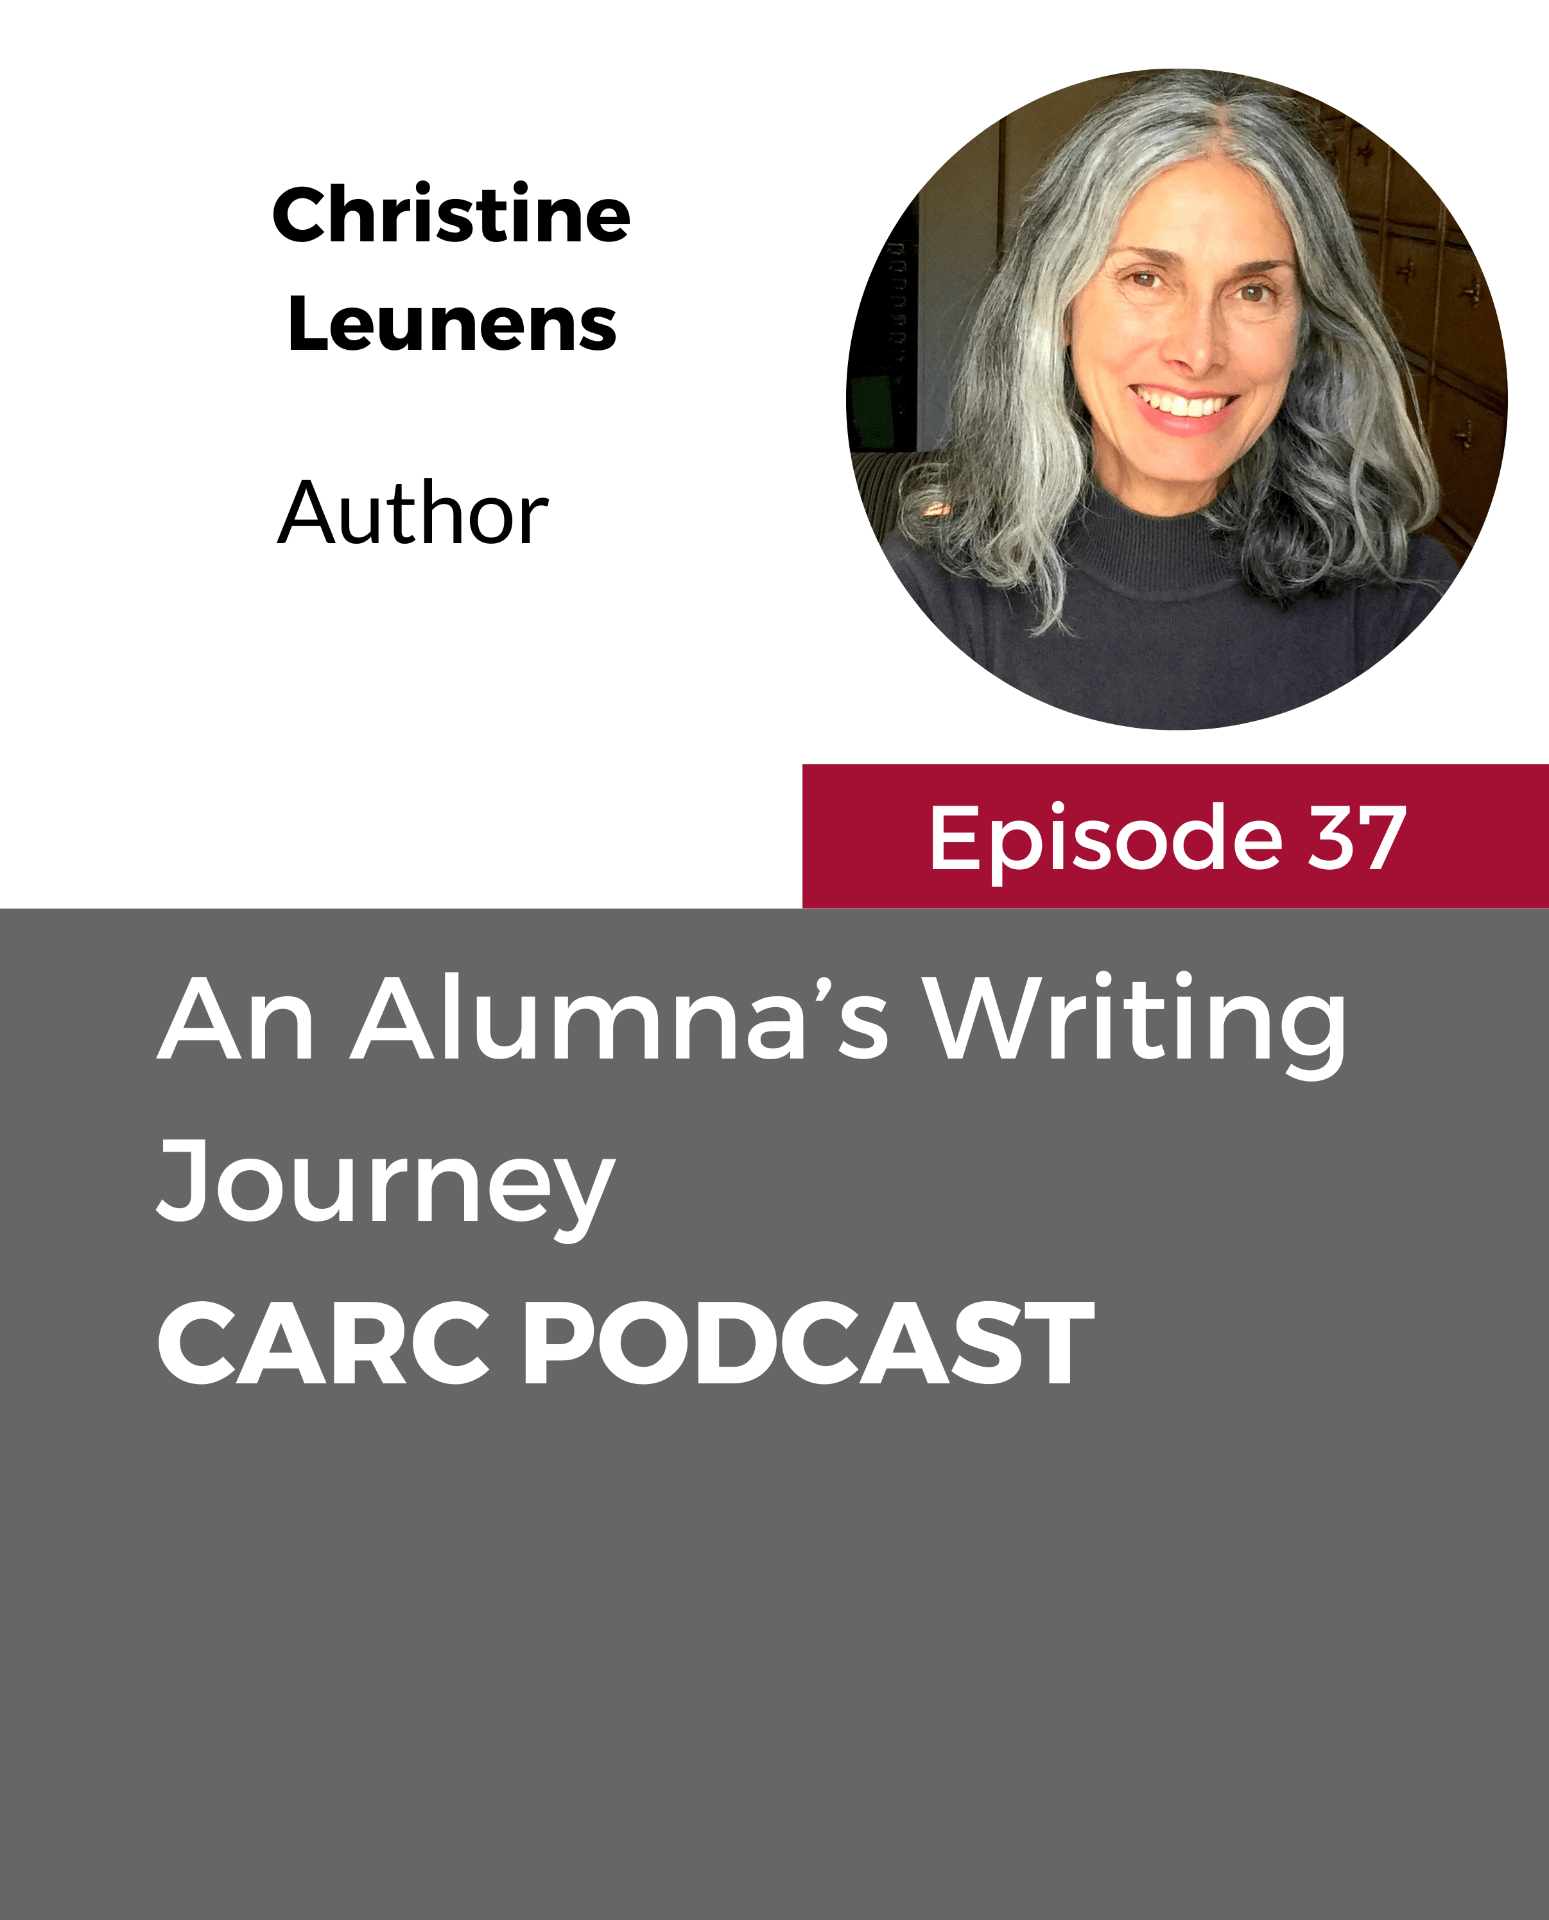 CARC Podcast, Episode 37, An Alumna's Writing Journey with Christine Leunens